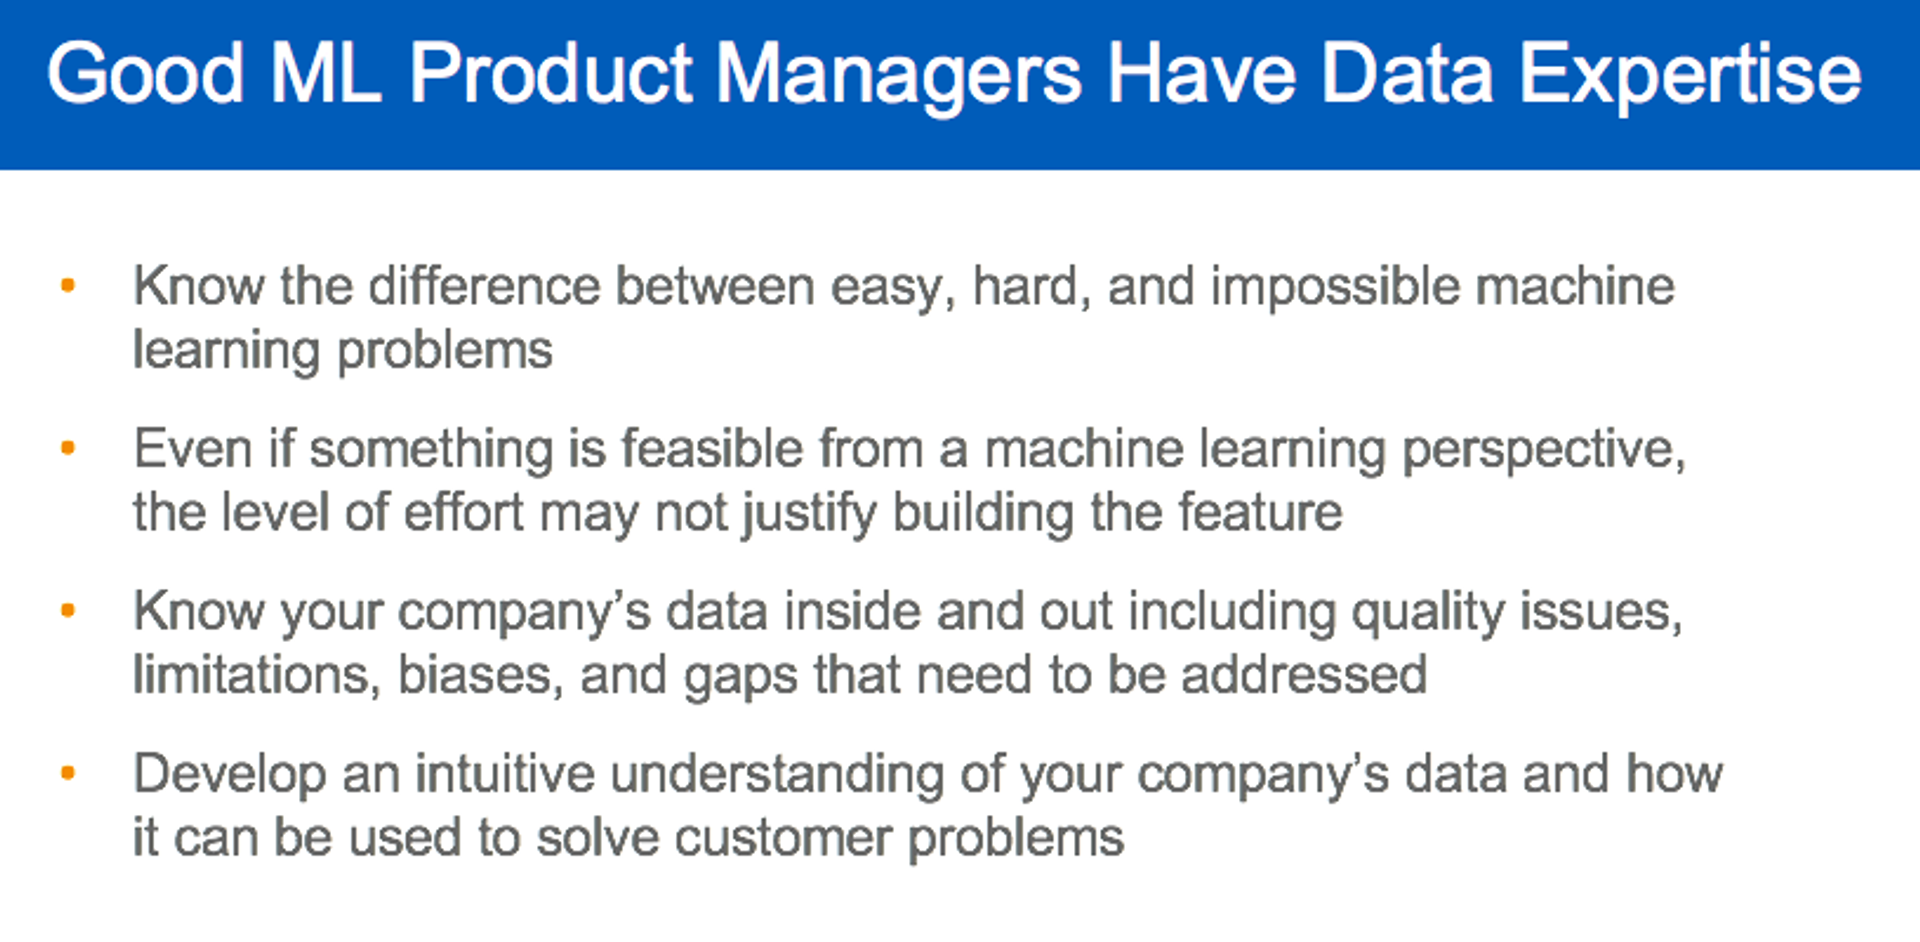 Good ML Product Managers Have Data Expertise